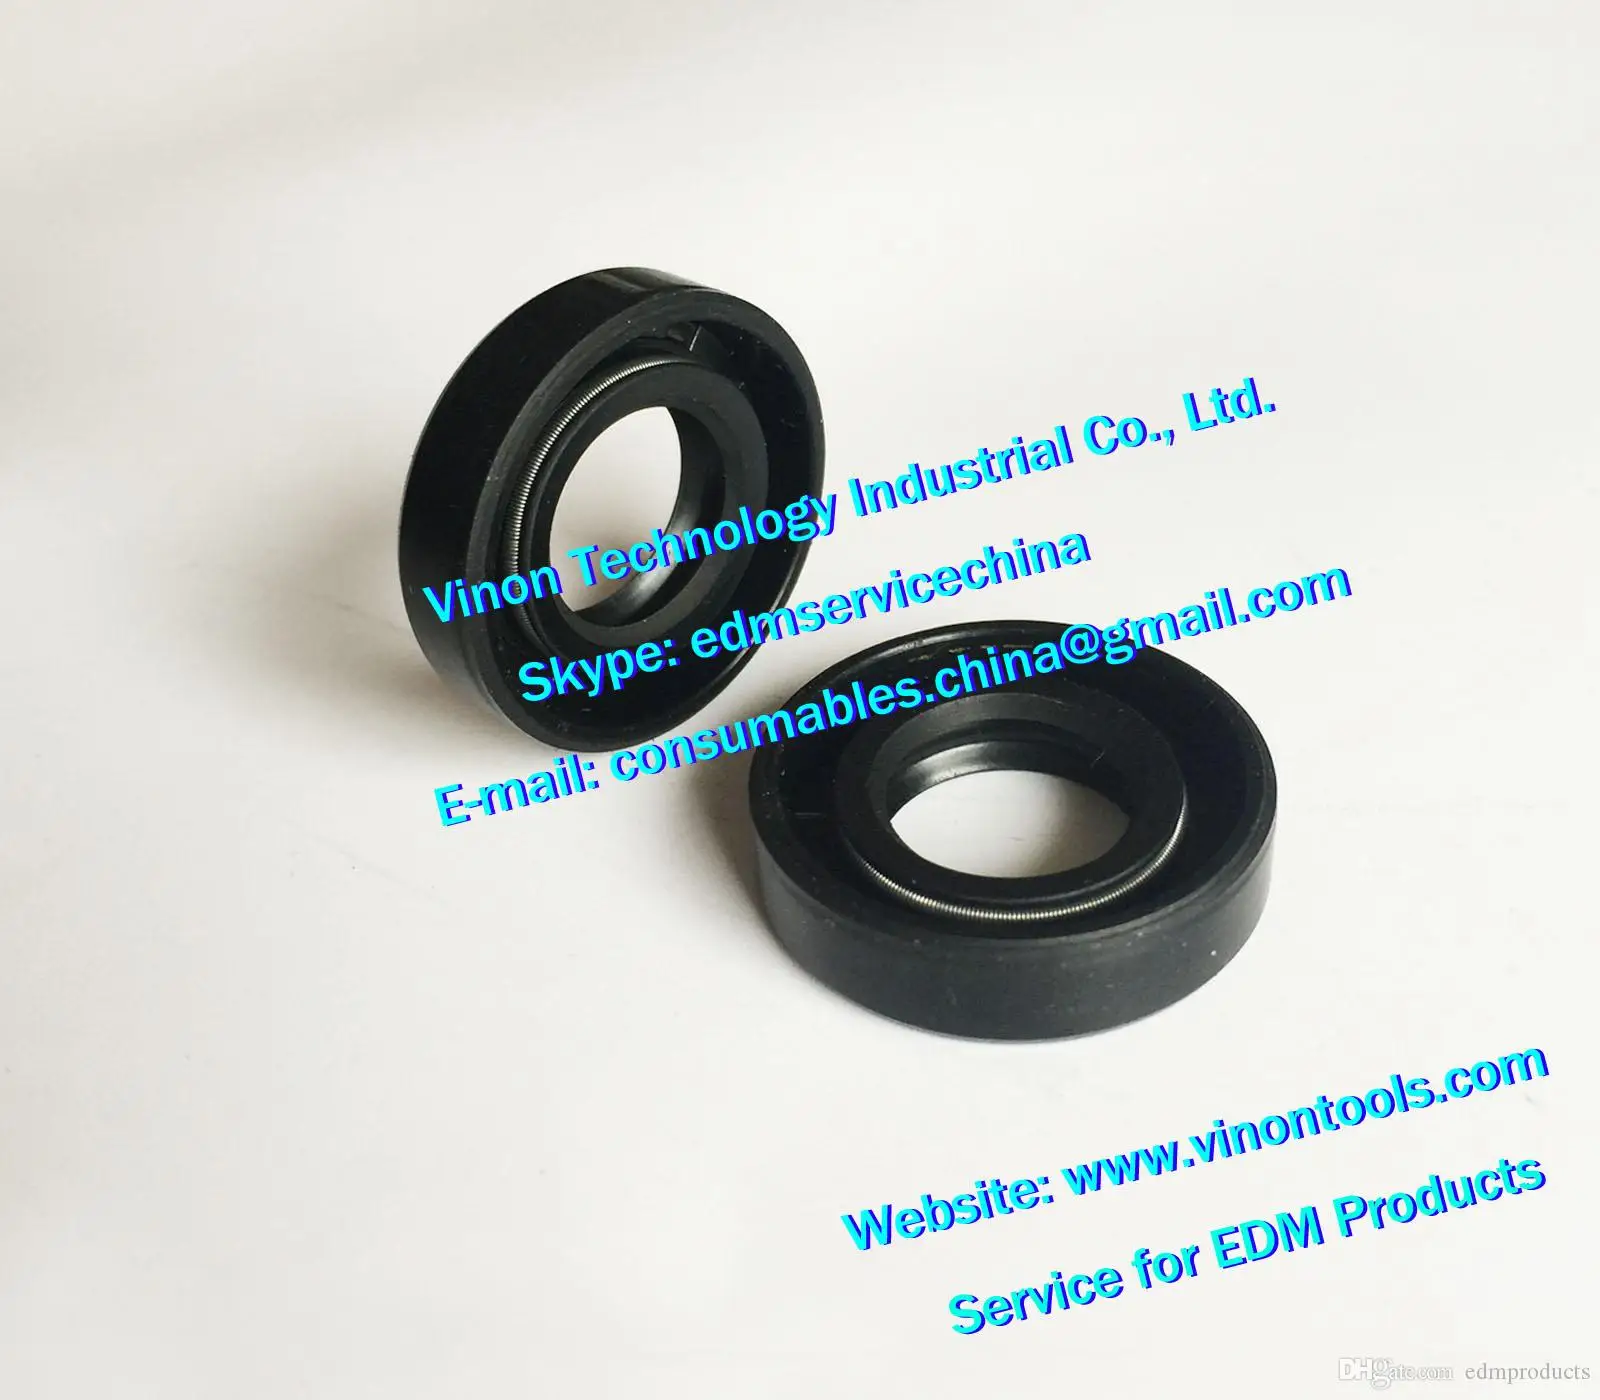 

(5pcs) 200544160 edm Extractable seal 544.160 Axle seal 204629190 for Lower TIM head empty for ROBOFIL 190,290,290P,300,310,390,